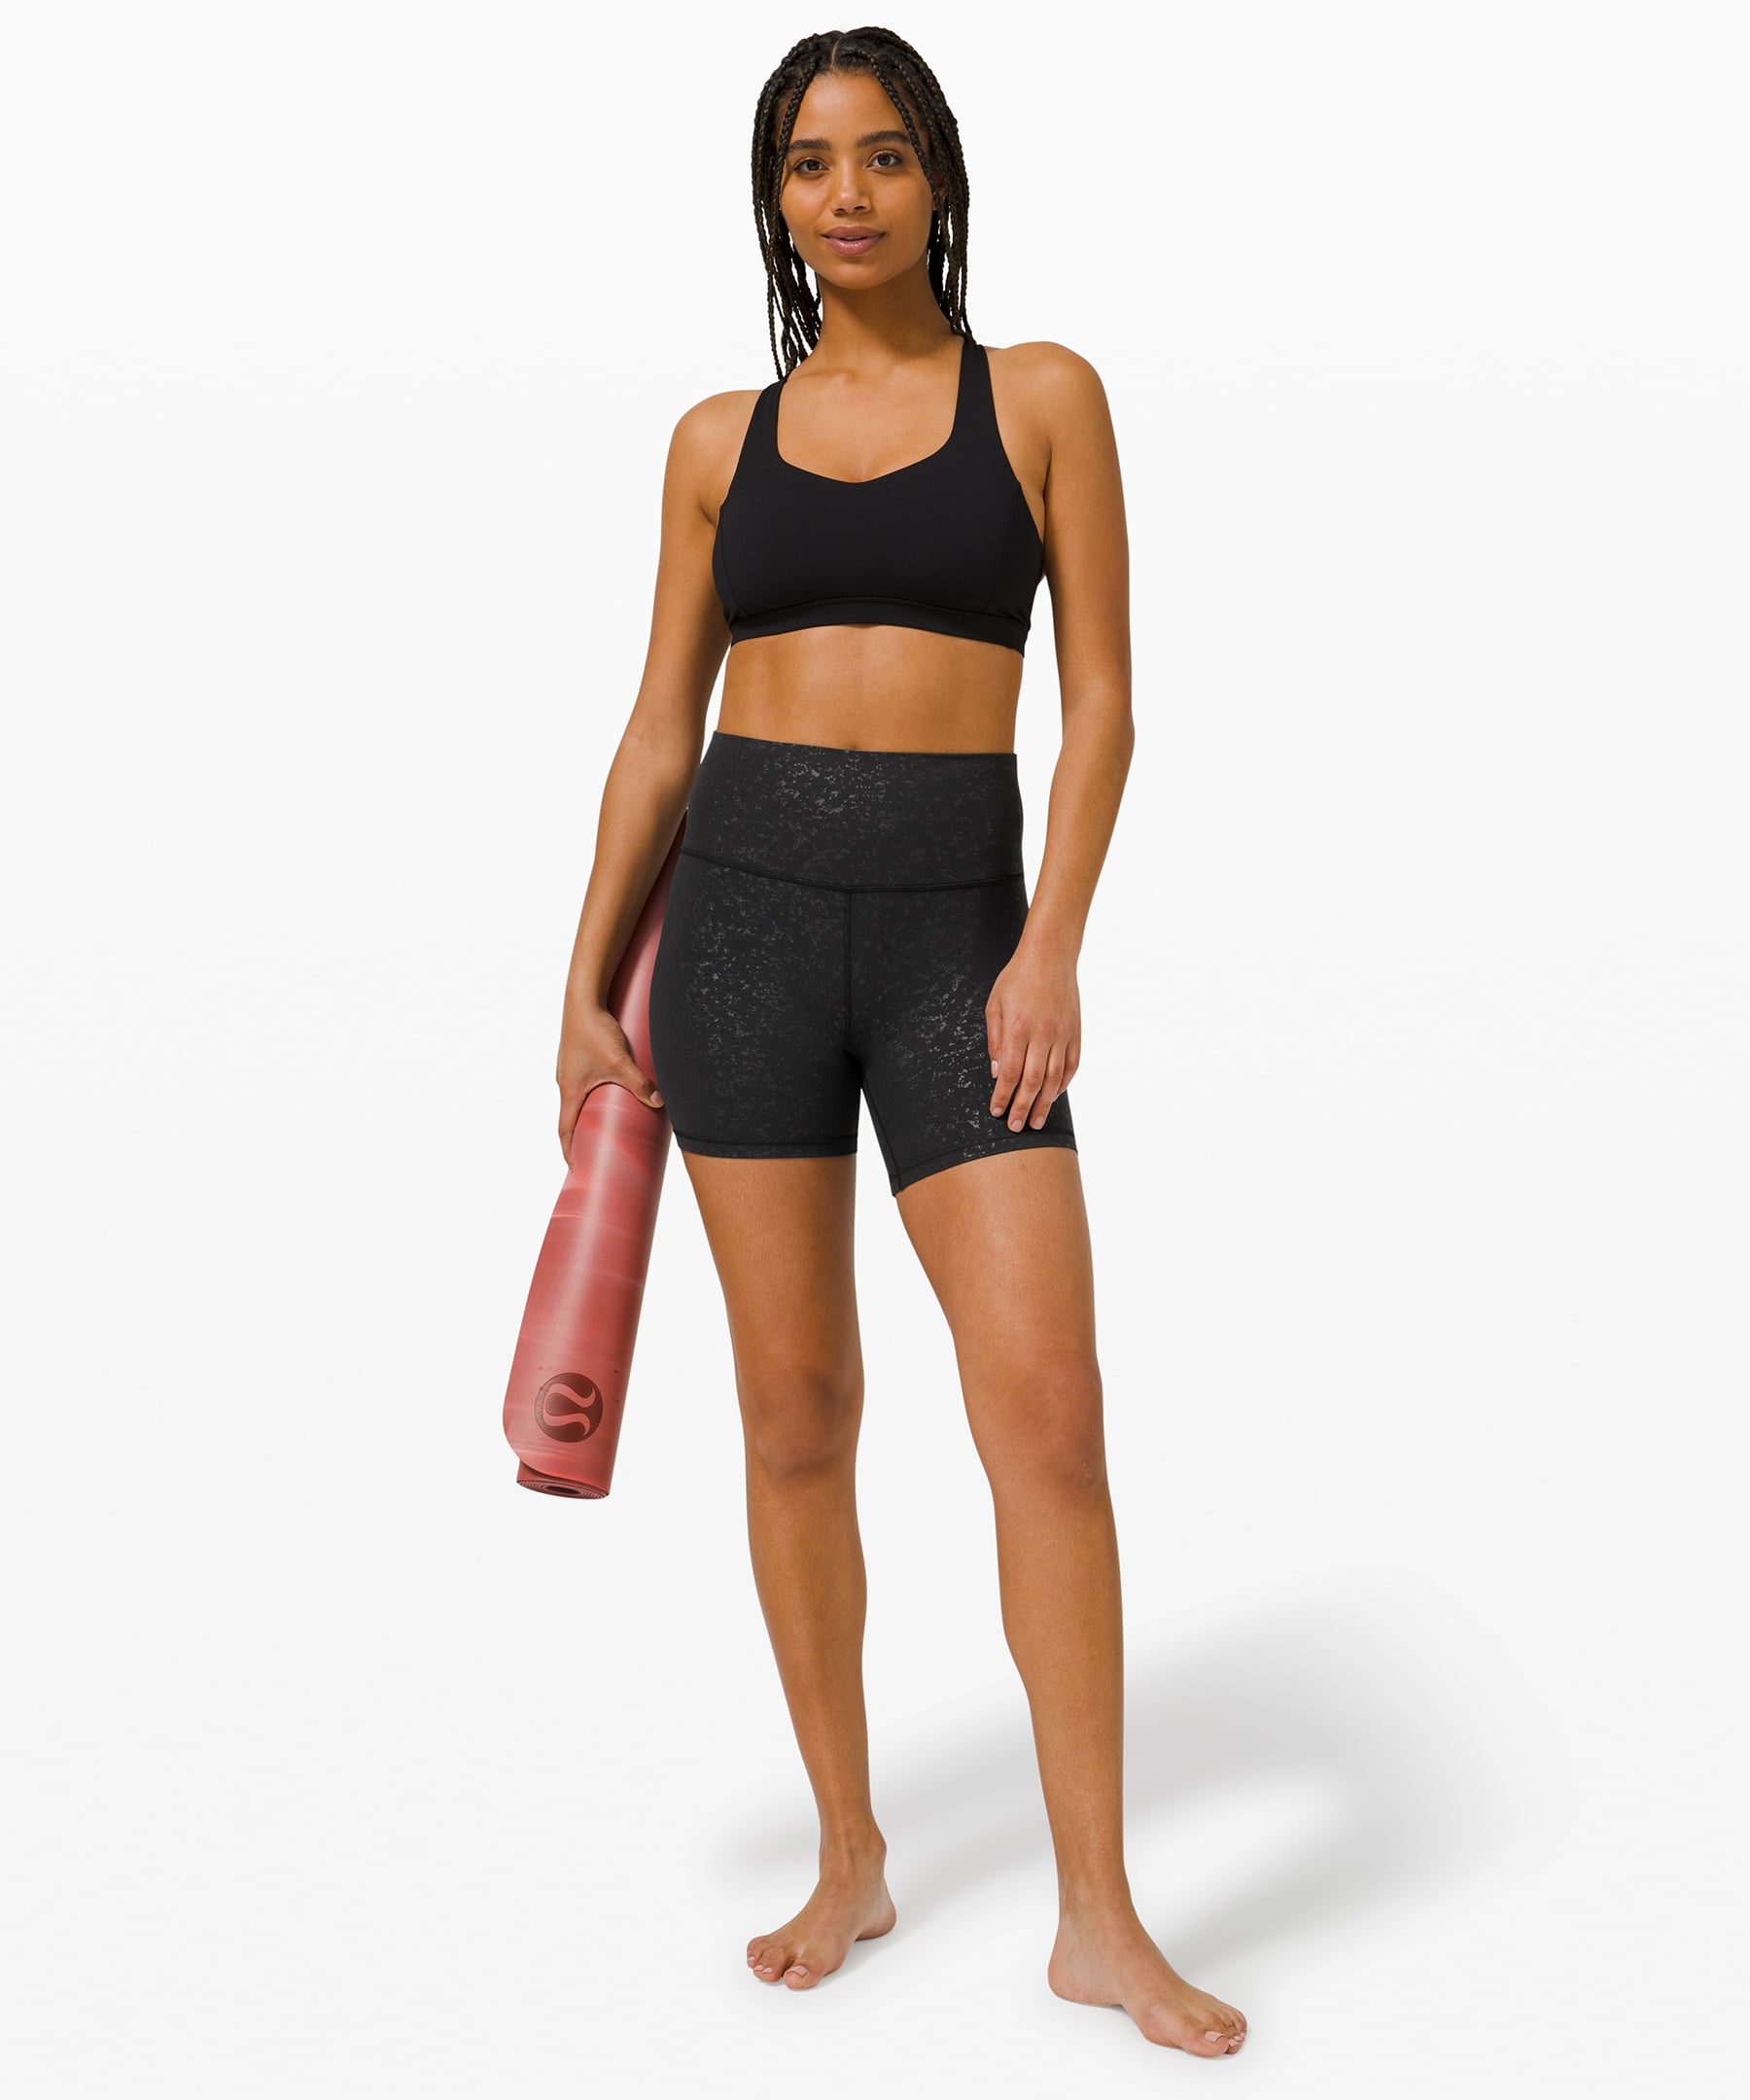 Lululemon Align Short and Free to be Serene Bra, 13 Matching Sets You Can  Shop at Lululemon, Because Your Shades of Black Should Match